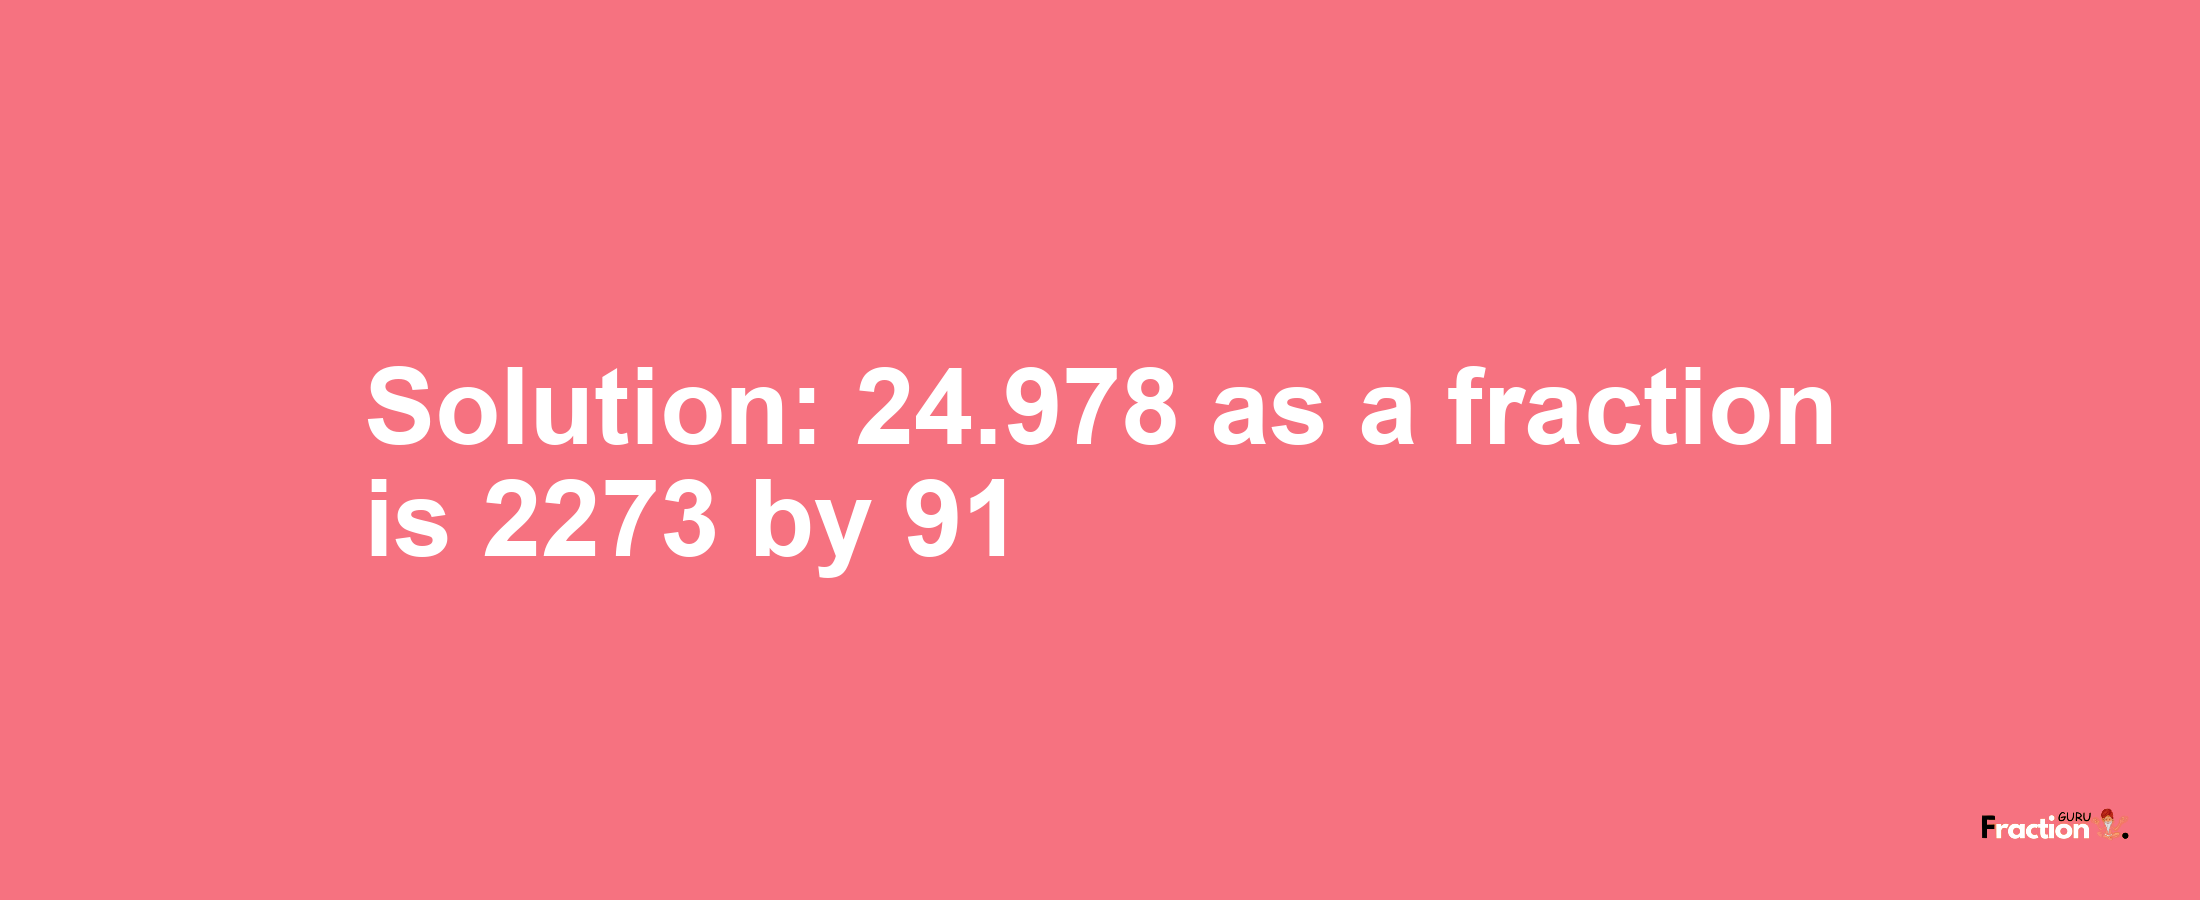 Solution:24.978 as a fraction is 2273/91